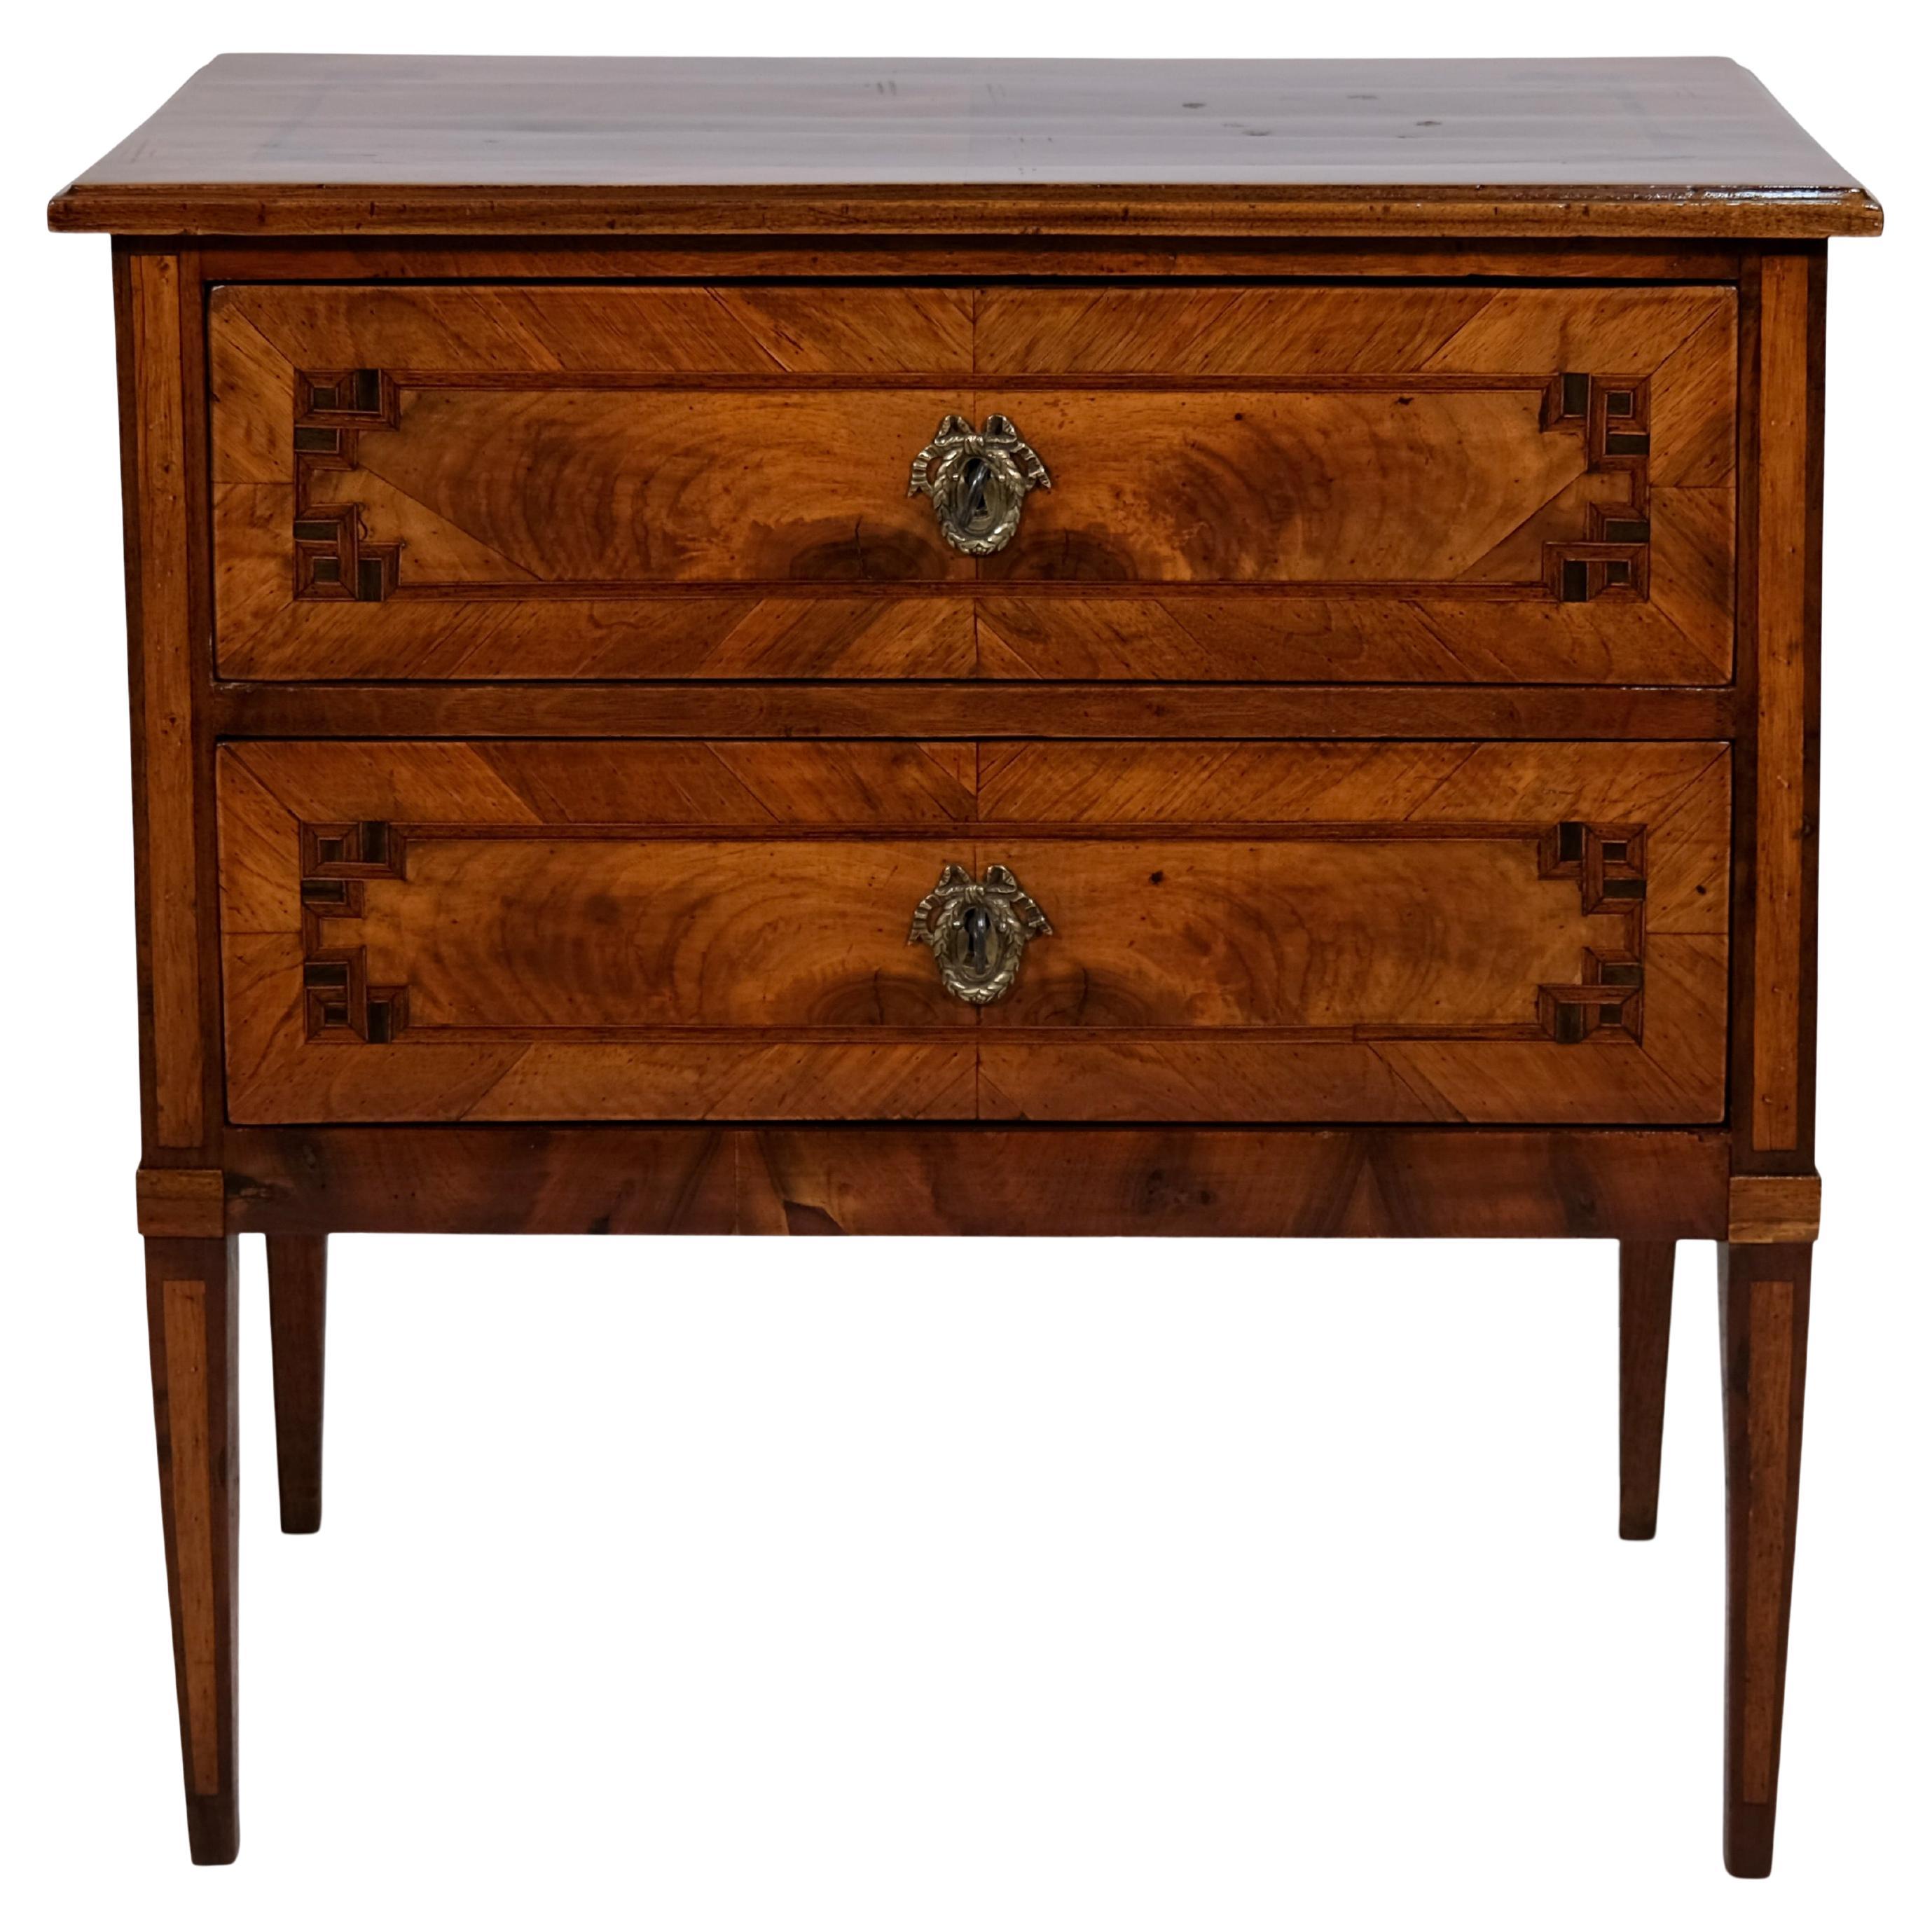 Handpolished 1780s Louis Seize XVI Chest Of Drawers In Nutwood